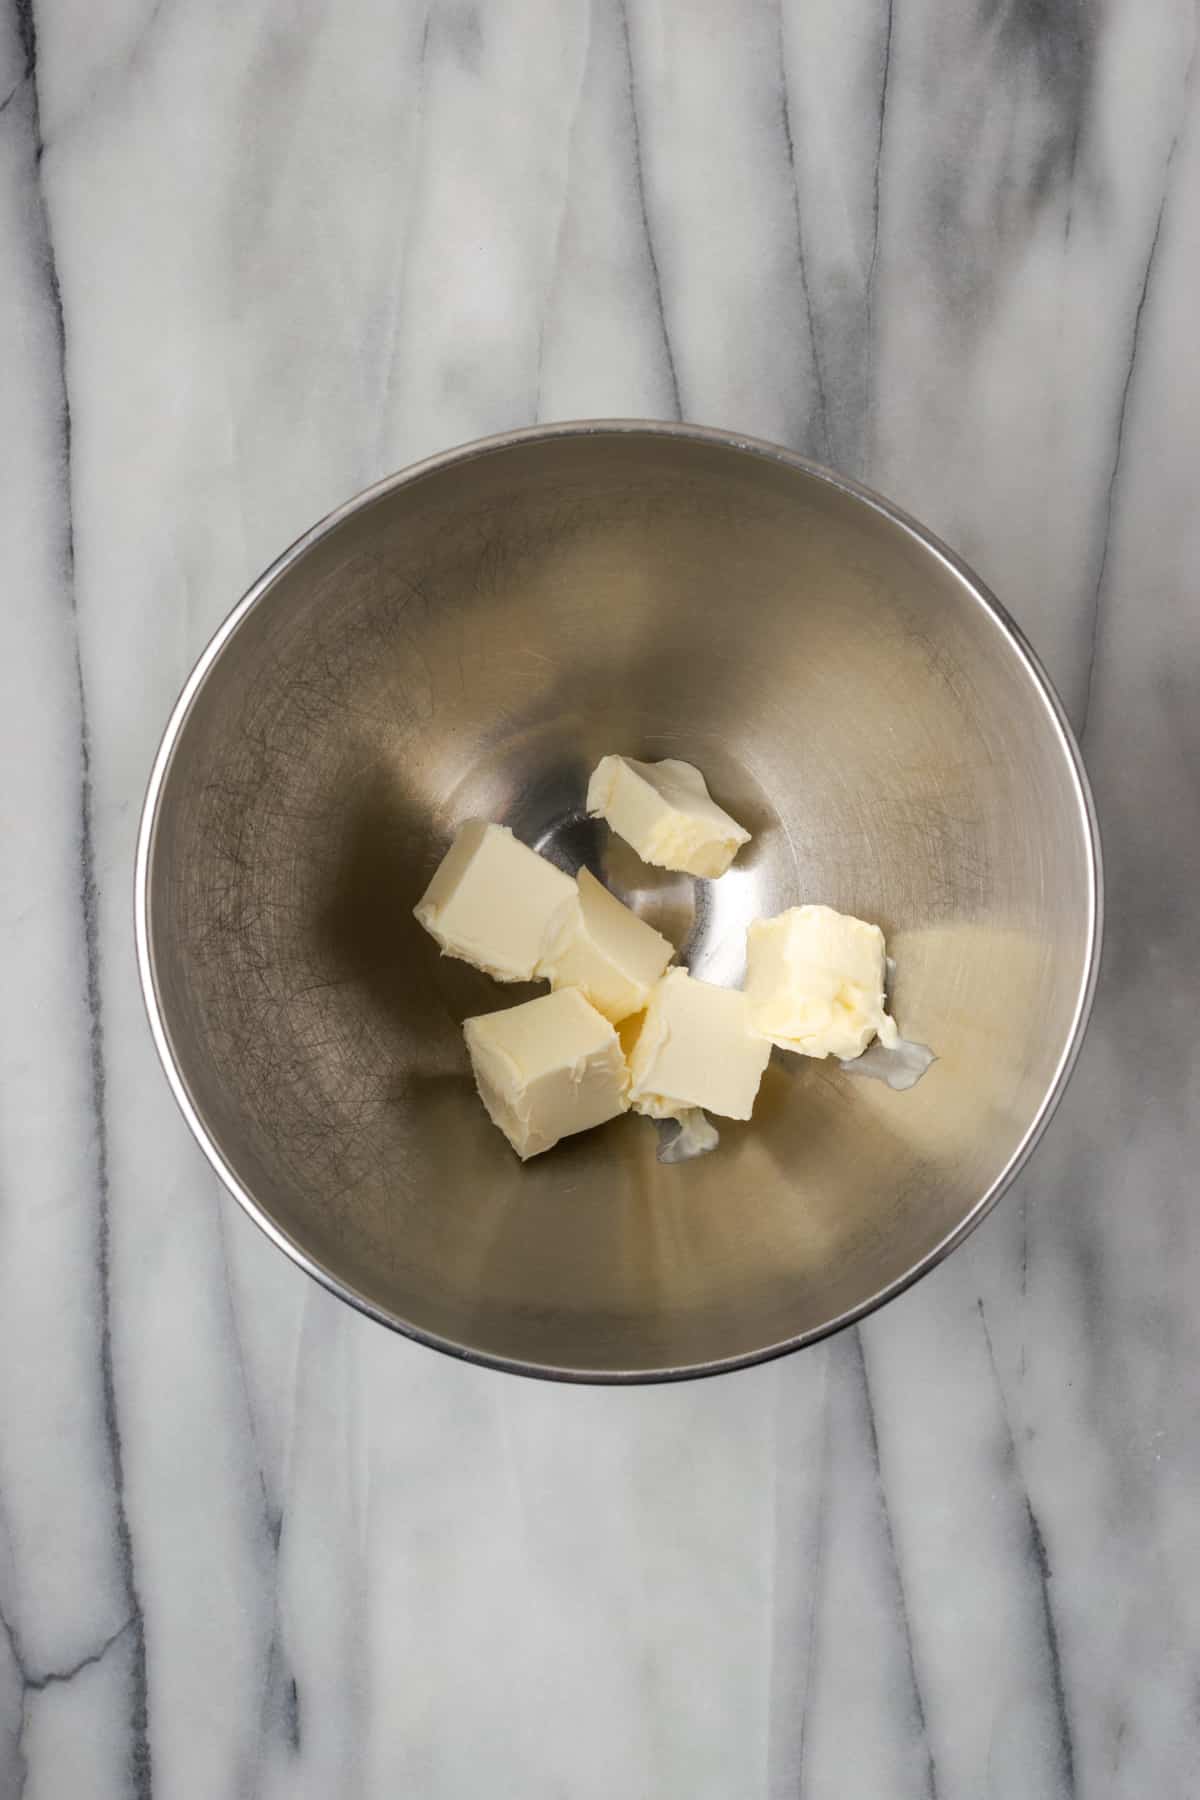 Slices of butter in a large metal mixing bowl.